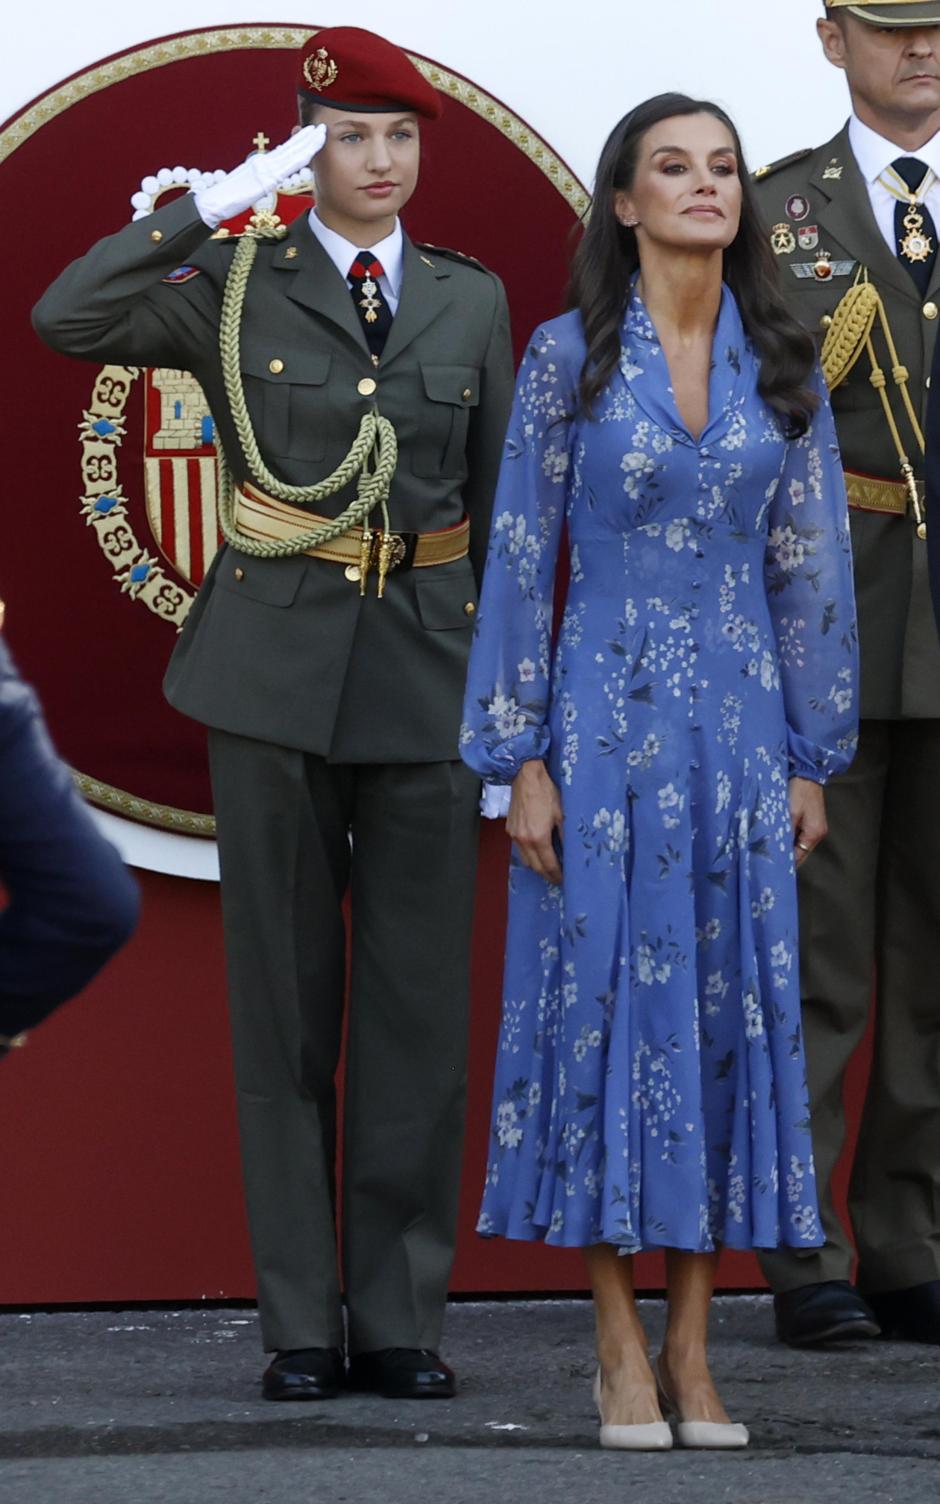 Spanish Queen Letizia with Princess Leonor de Borbon attending a military parade during the known as Dia de la Hispanidad, Spain's National Day, in Madrid, on Thursday 12, October 2023.